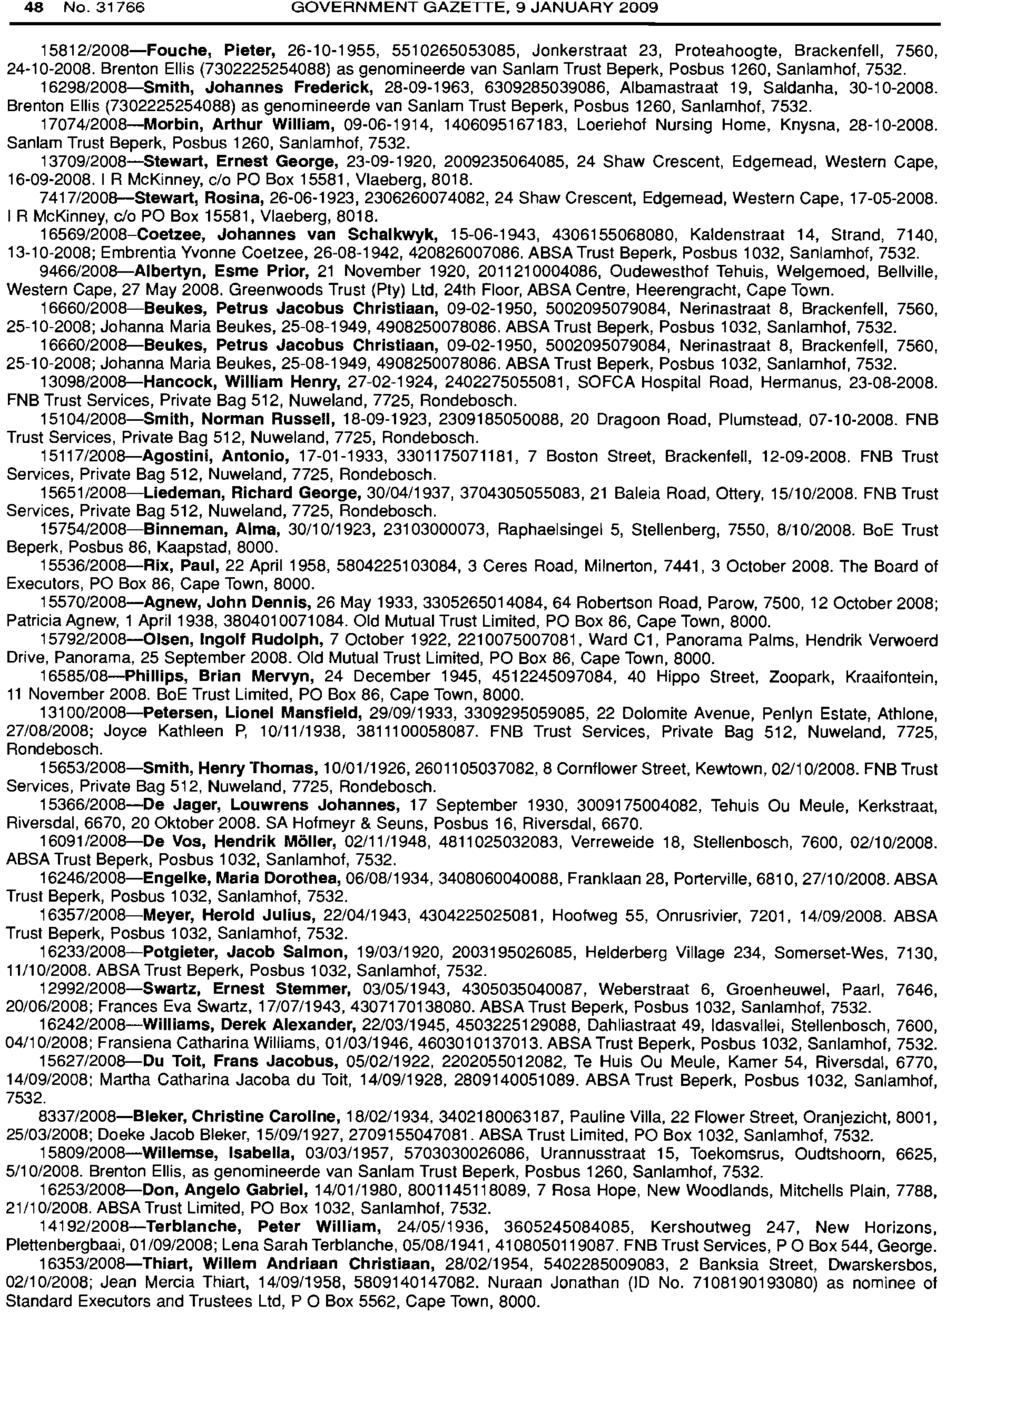 48 No.31766 GOVERNMENT GAZETTE, 9 JANUARY 2009 15812/2008-Fouche, Pieter, 26-10-1955, 5510265053085, Jonkerstraat 23, Proteahoogte, Brackenfell, 7560, 24-10-2008.